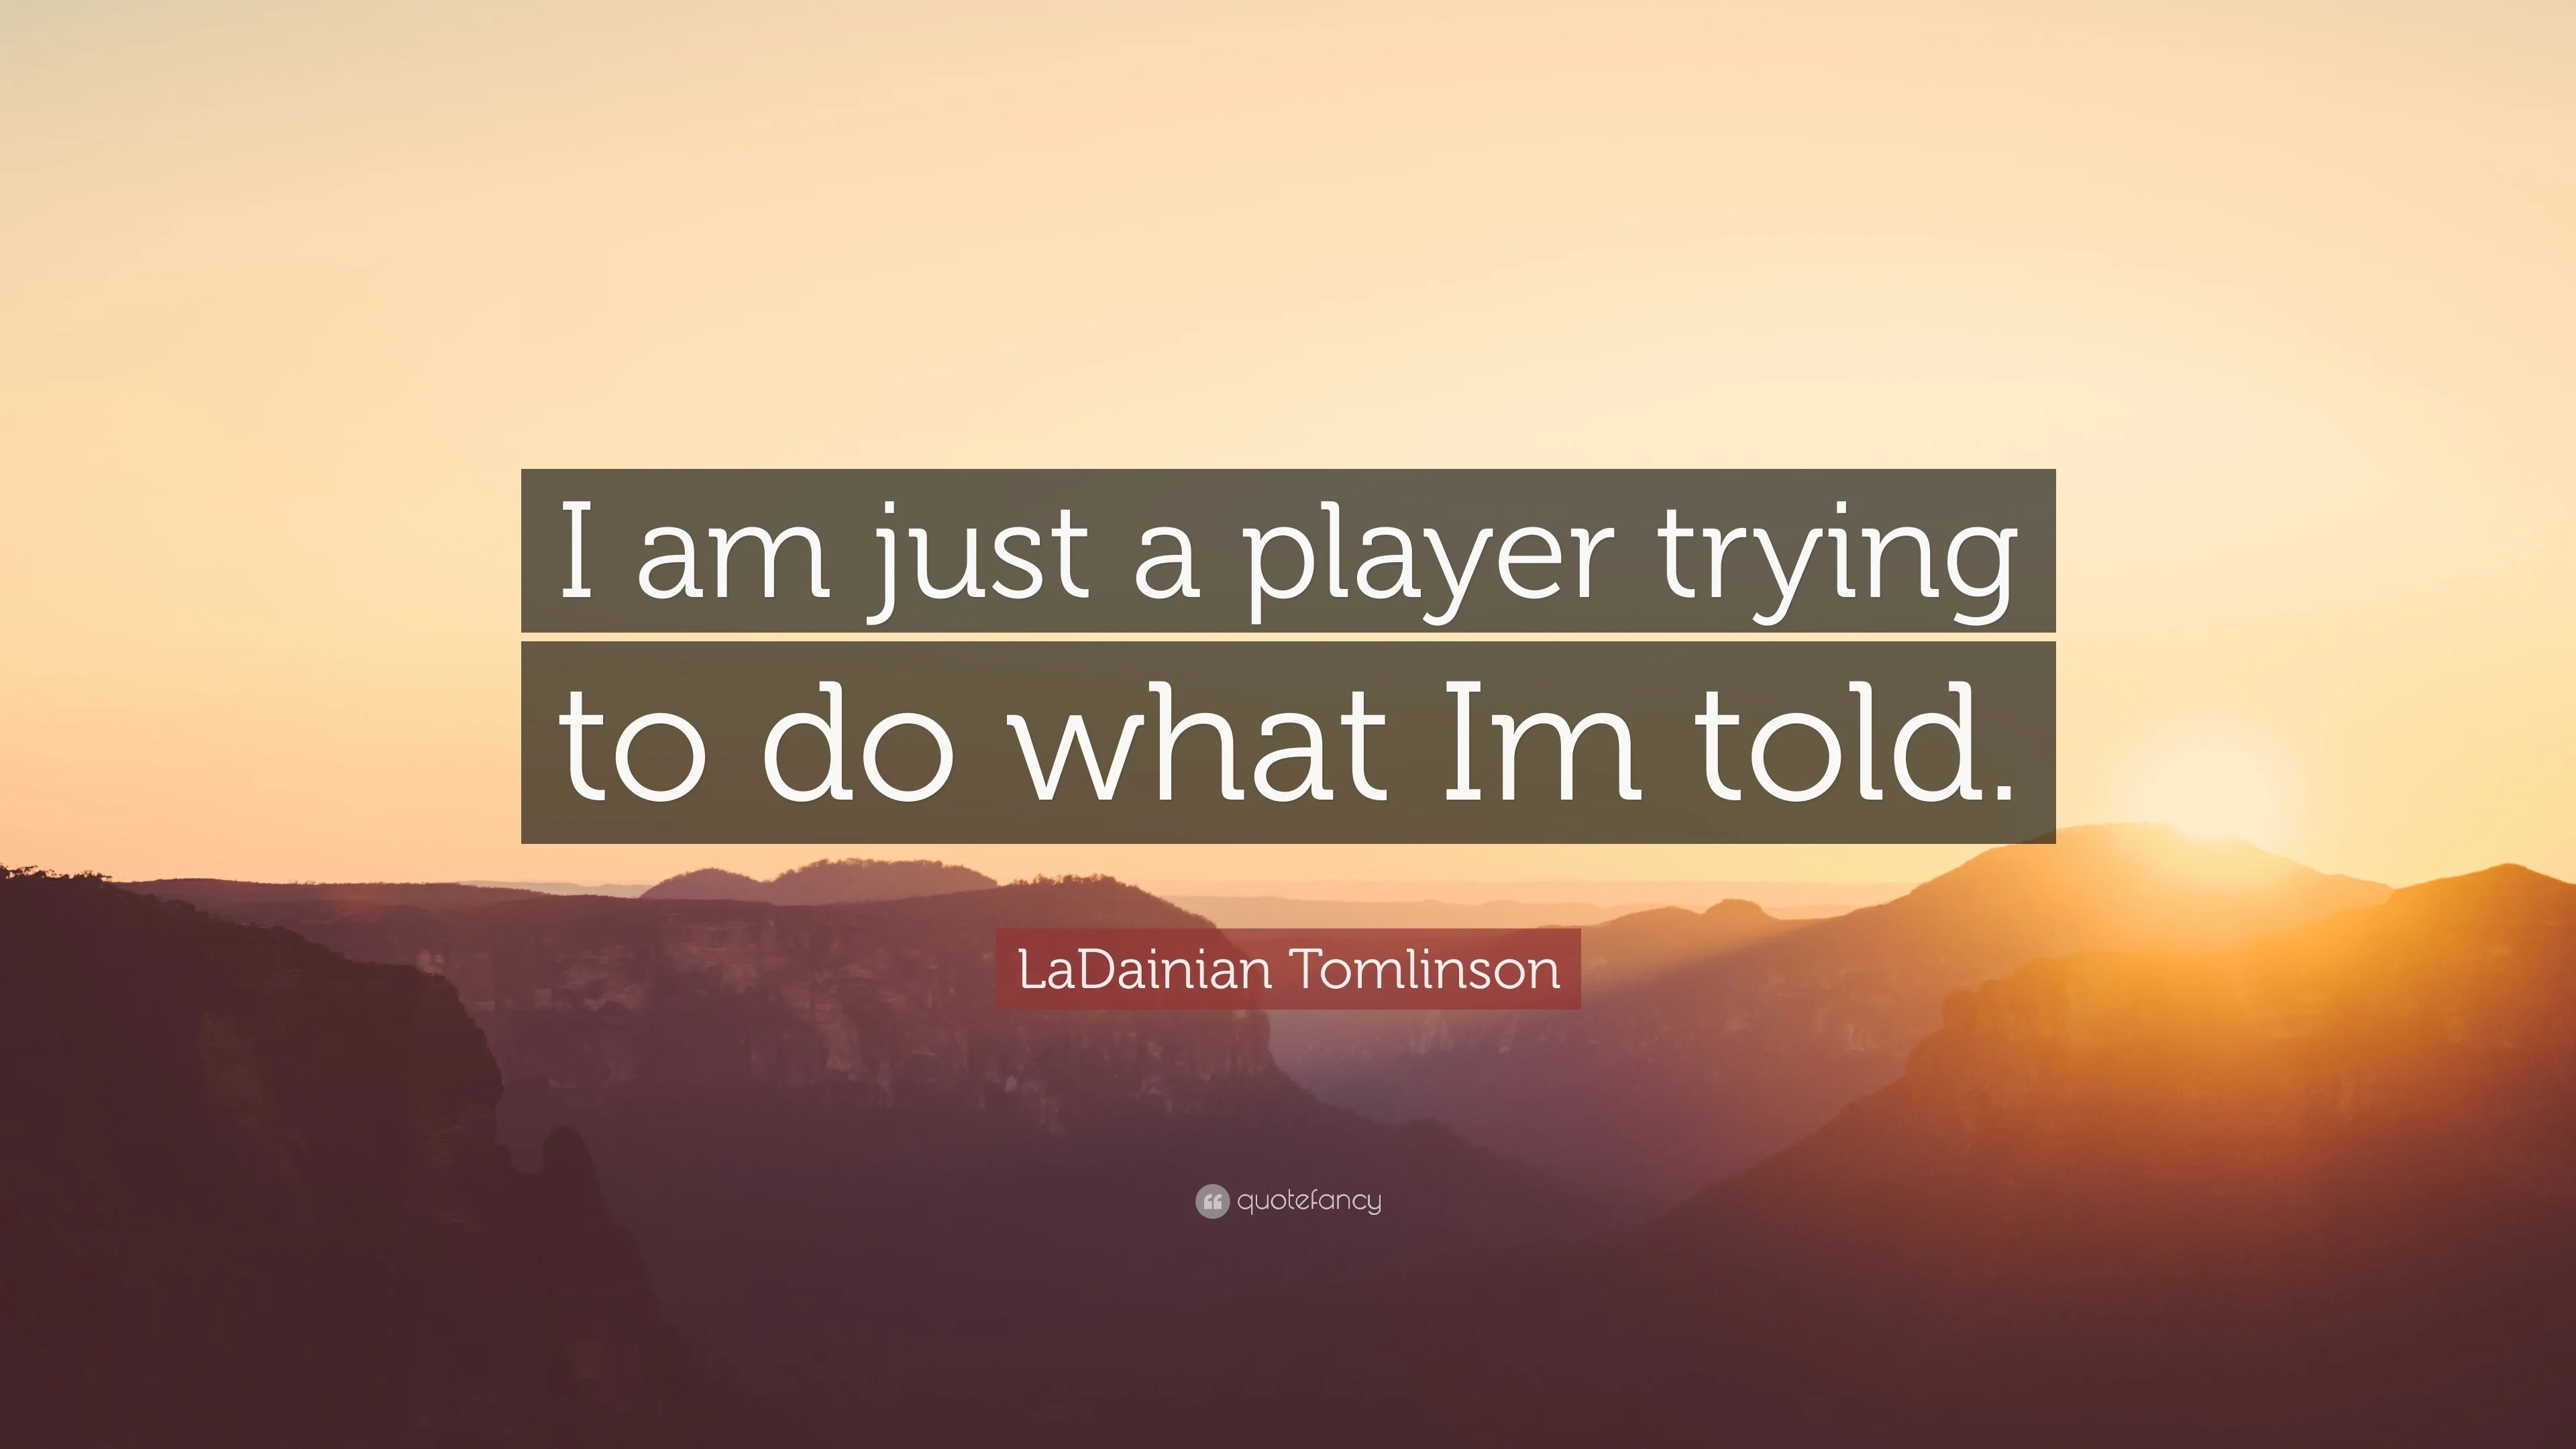 LaDainian Tomlinson Quote I am just a player trying to do what Im told